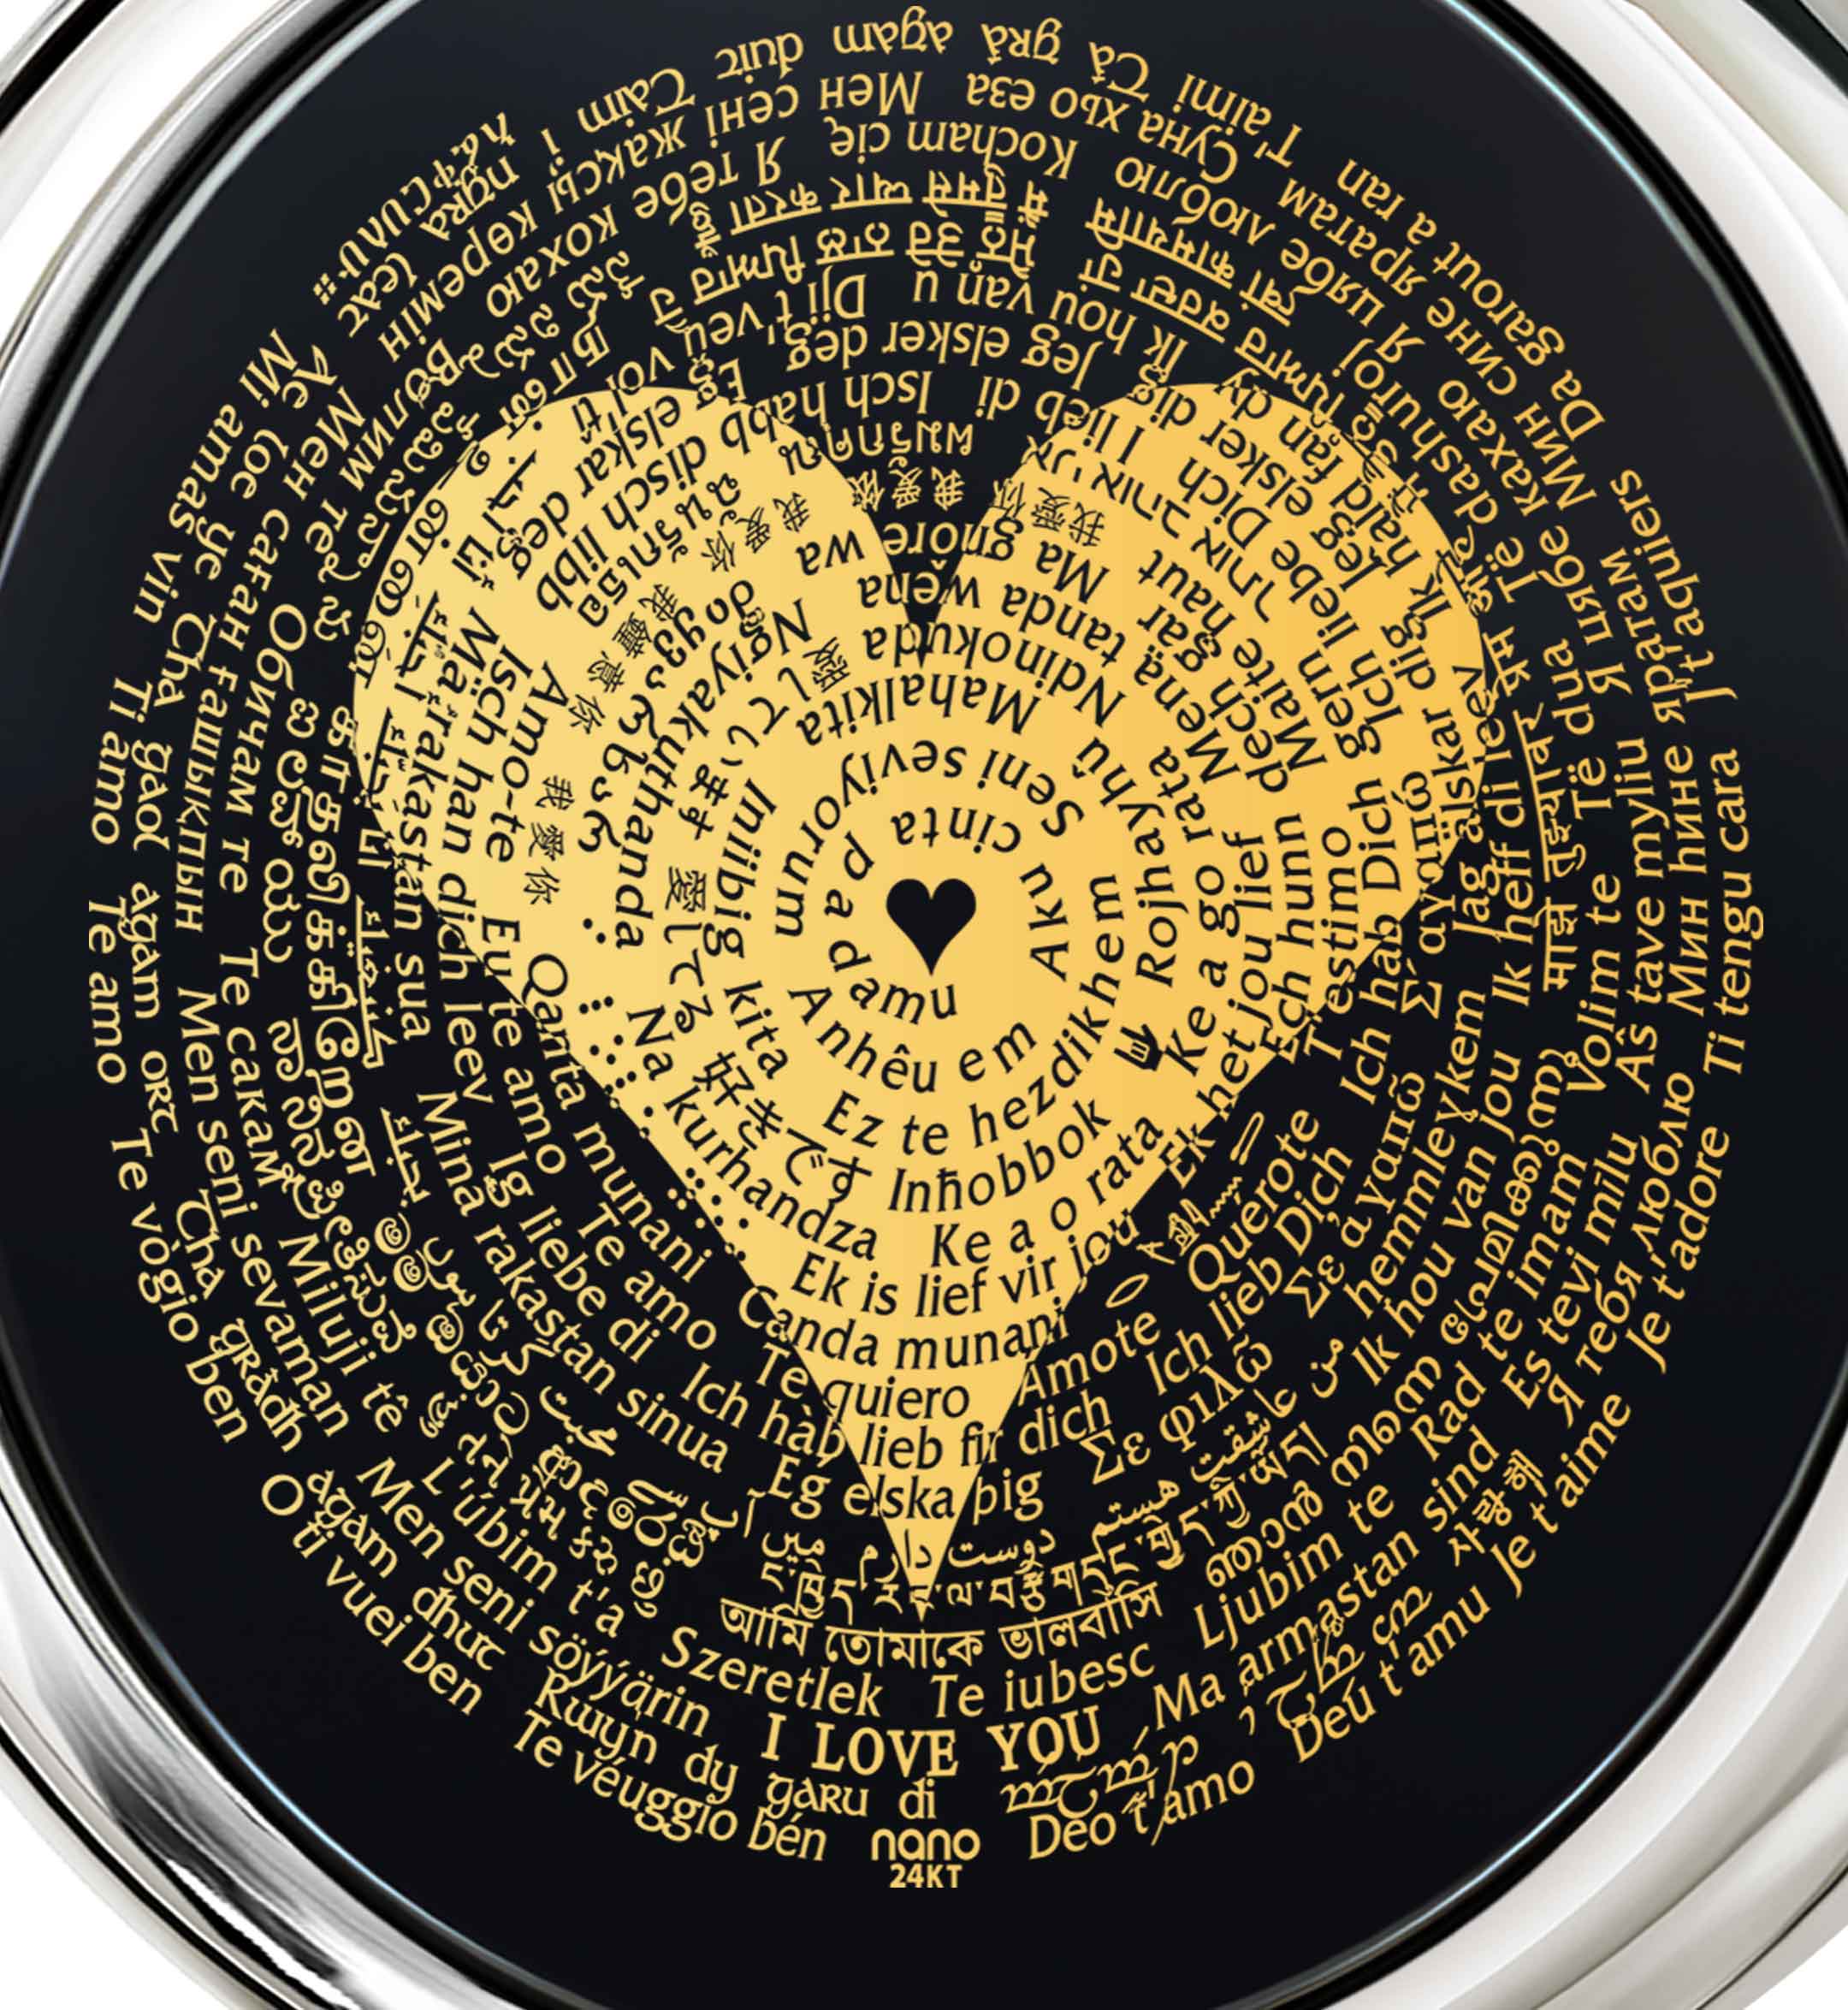 A decorative I Love You Necklace in 120 Languages featuring a spiral of "i love you" in various languages, centered around a black heart.